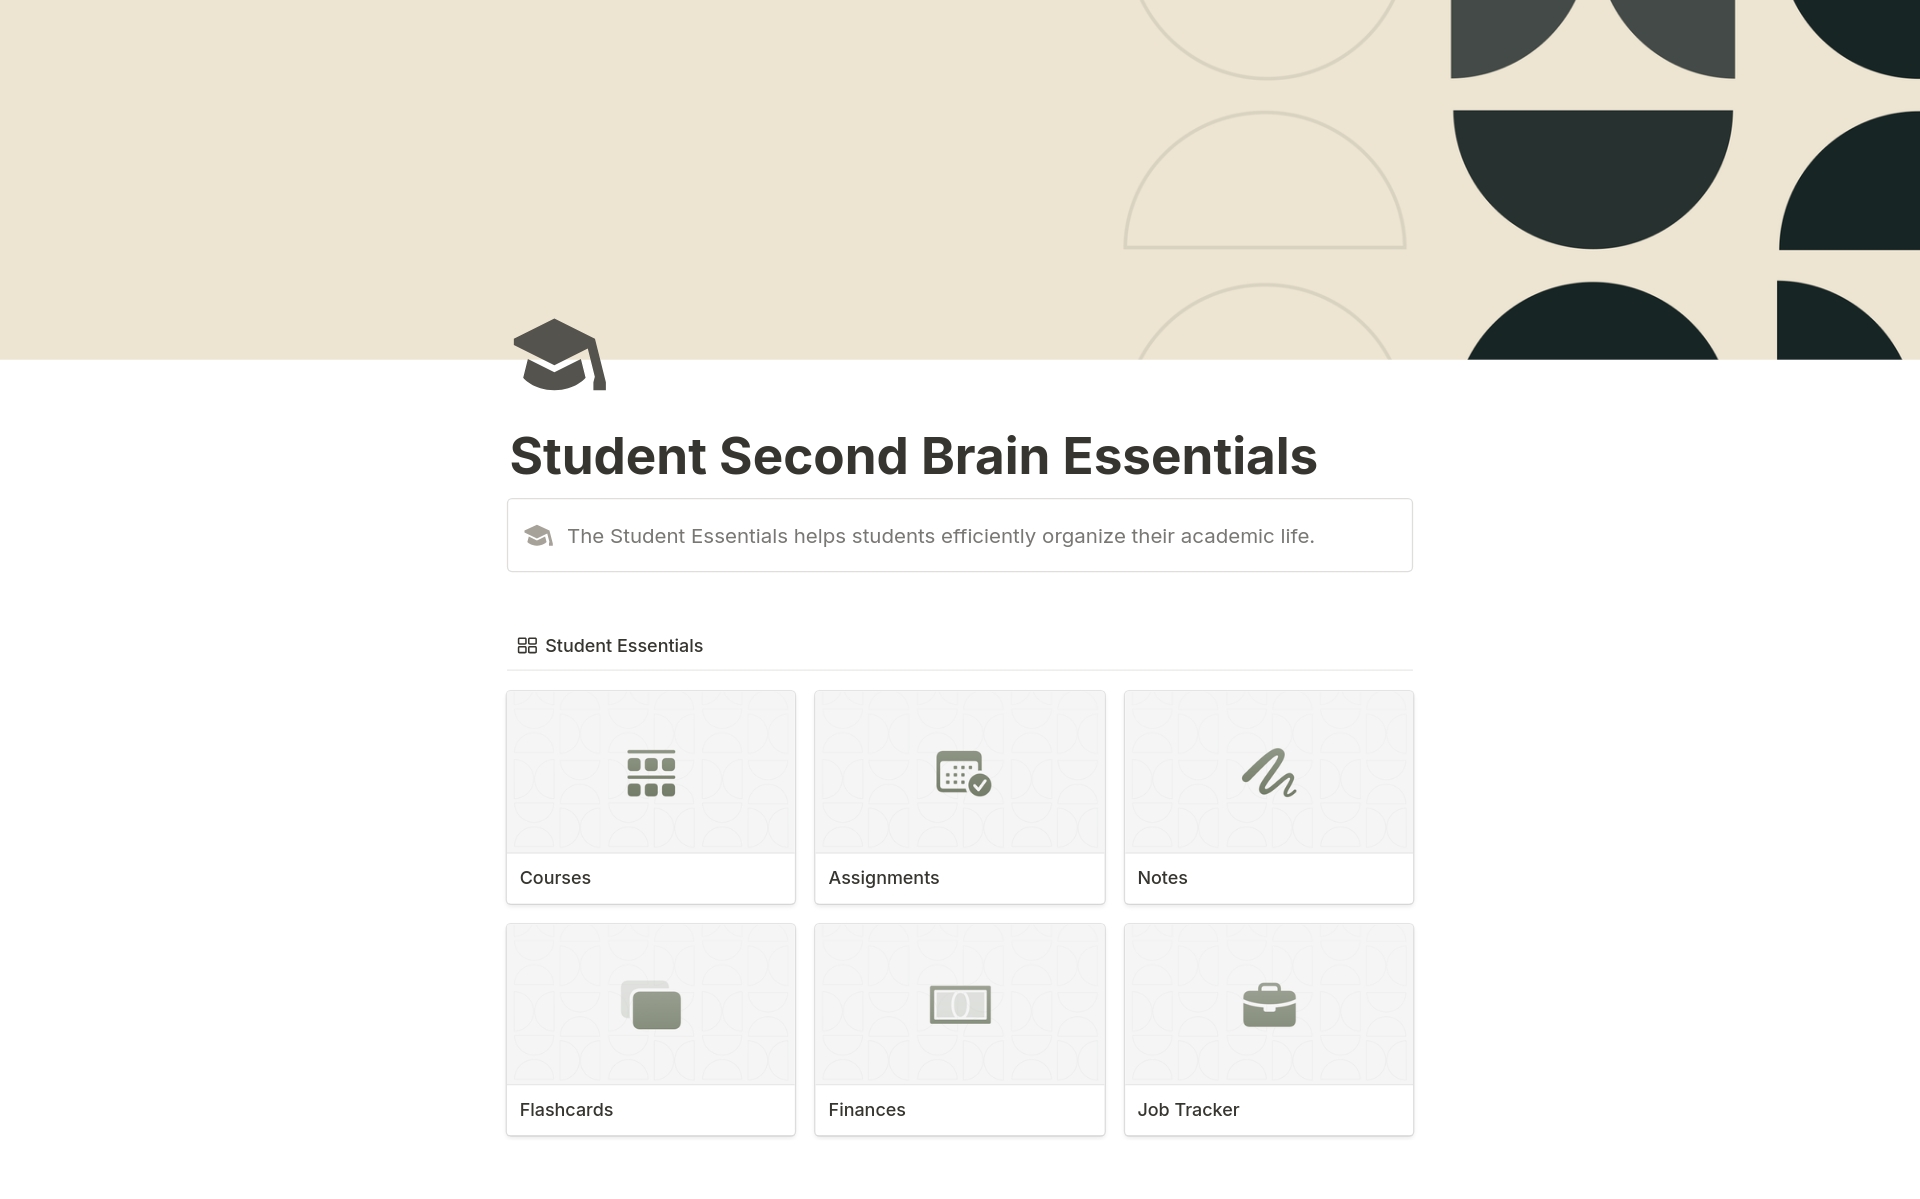 The Student Essentials helps students efficiently organize their academic life.